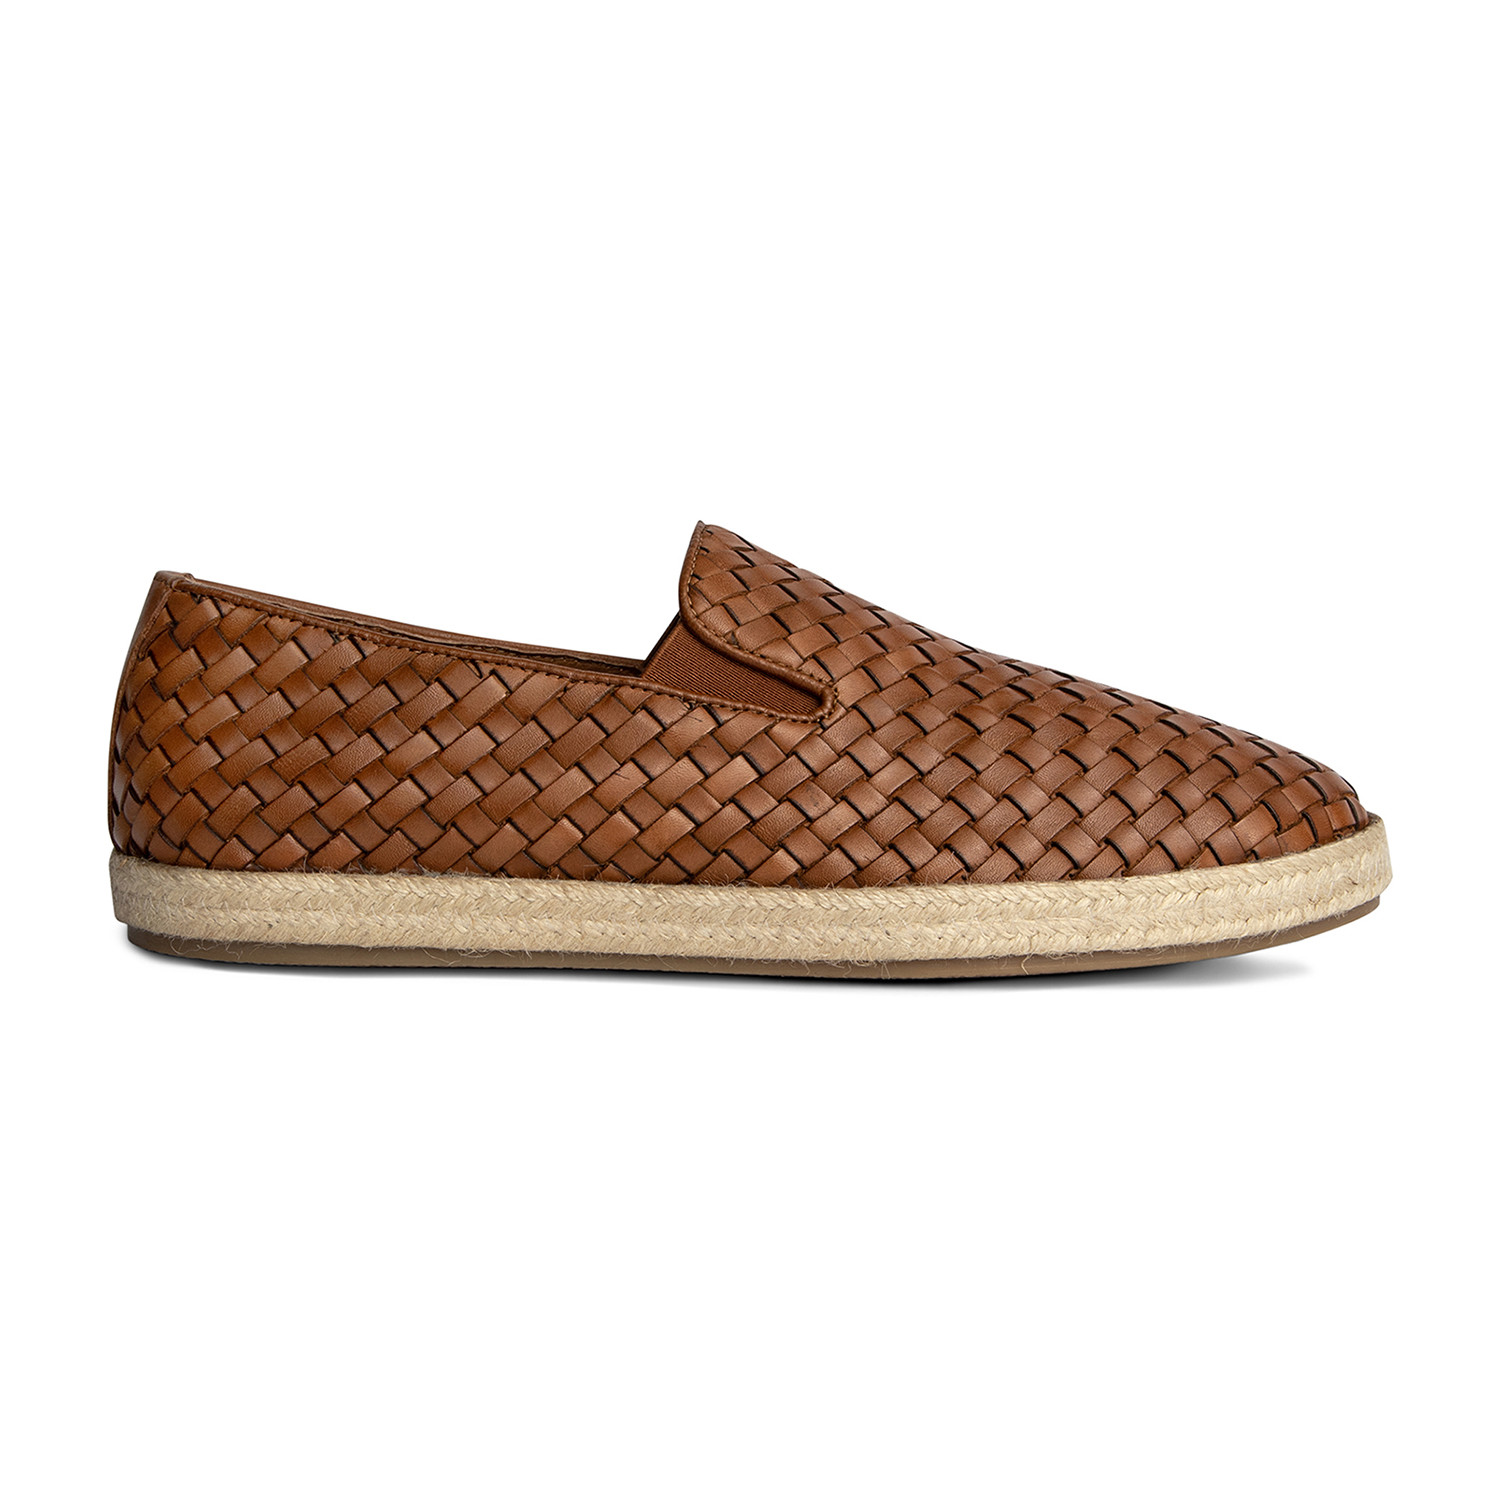 Tito Interweave Slip-on Sneakers // Tan (US: 13) - Clearance: Men's ...